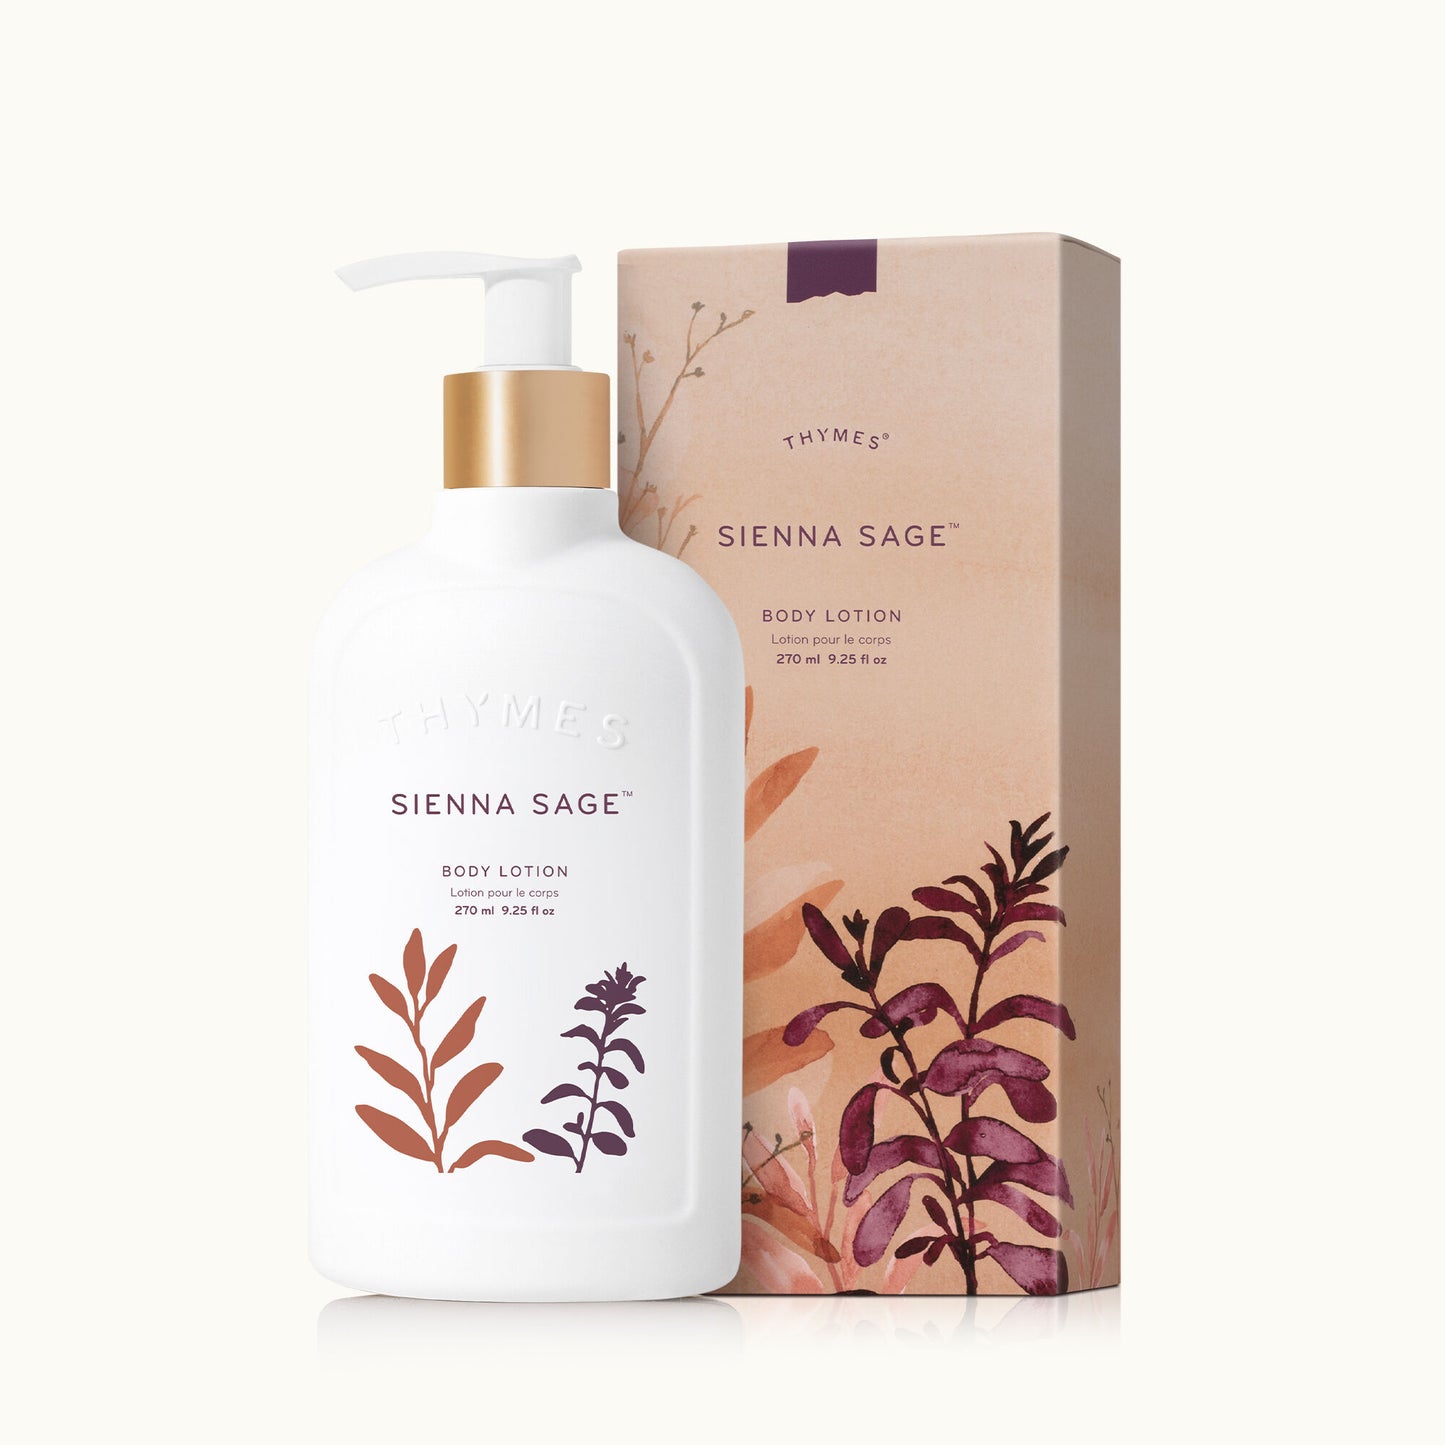 THYMES SIENNA SAGE BODY LOTION